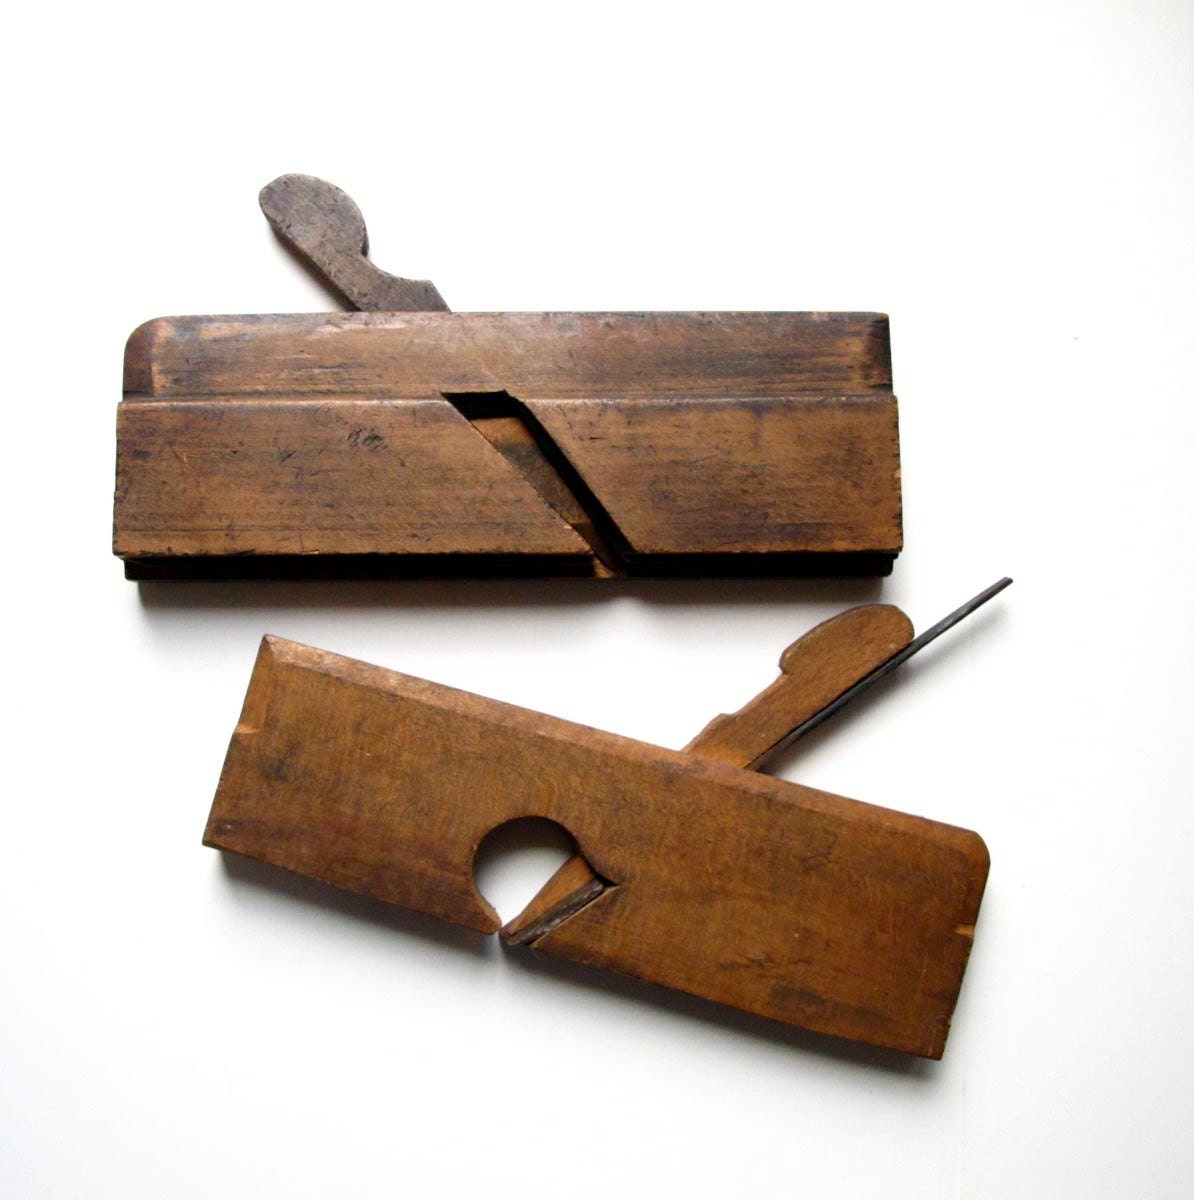 Antique woodworking chisels